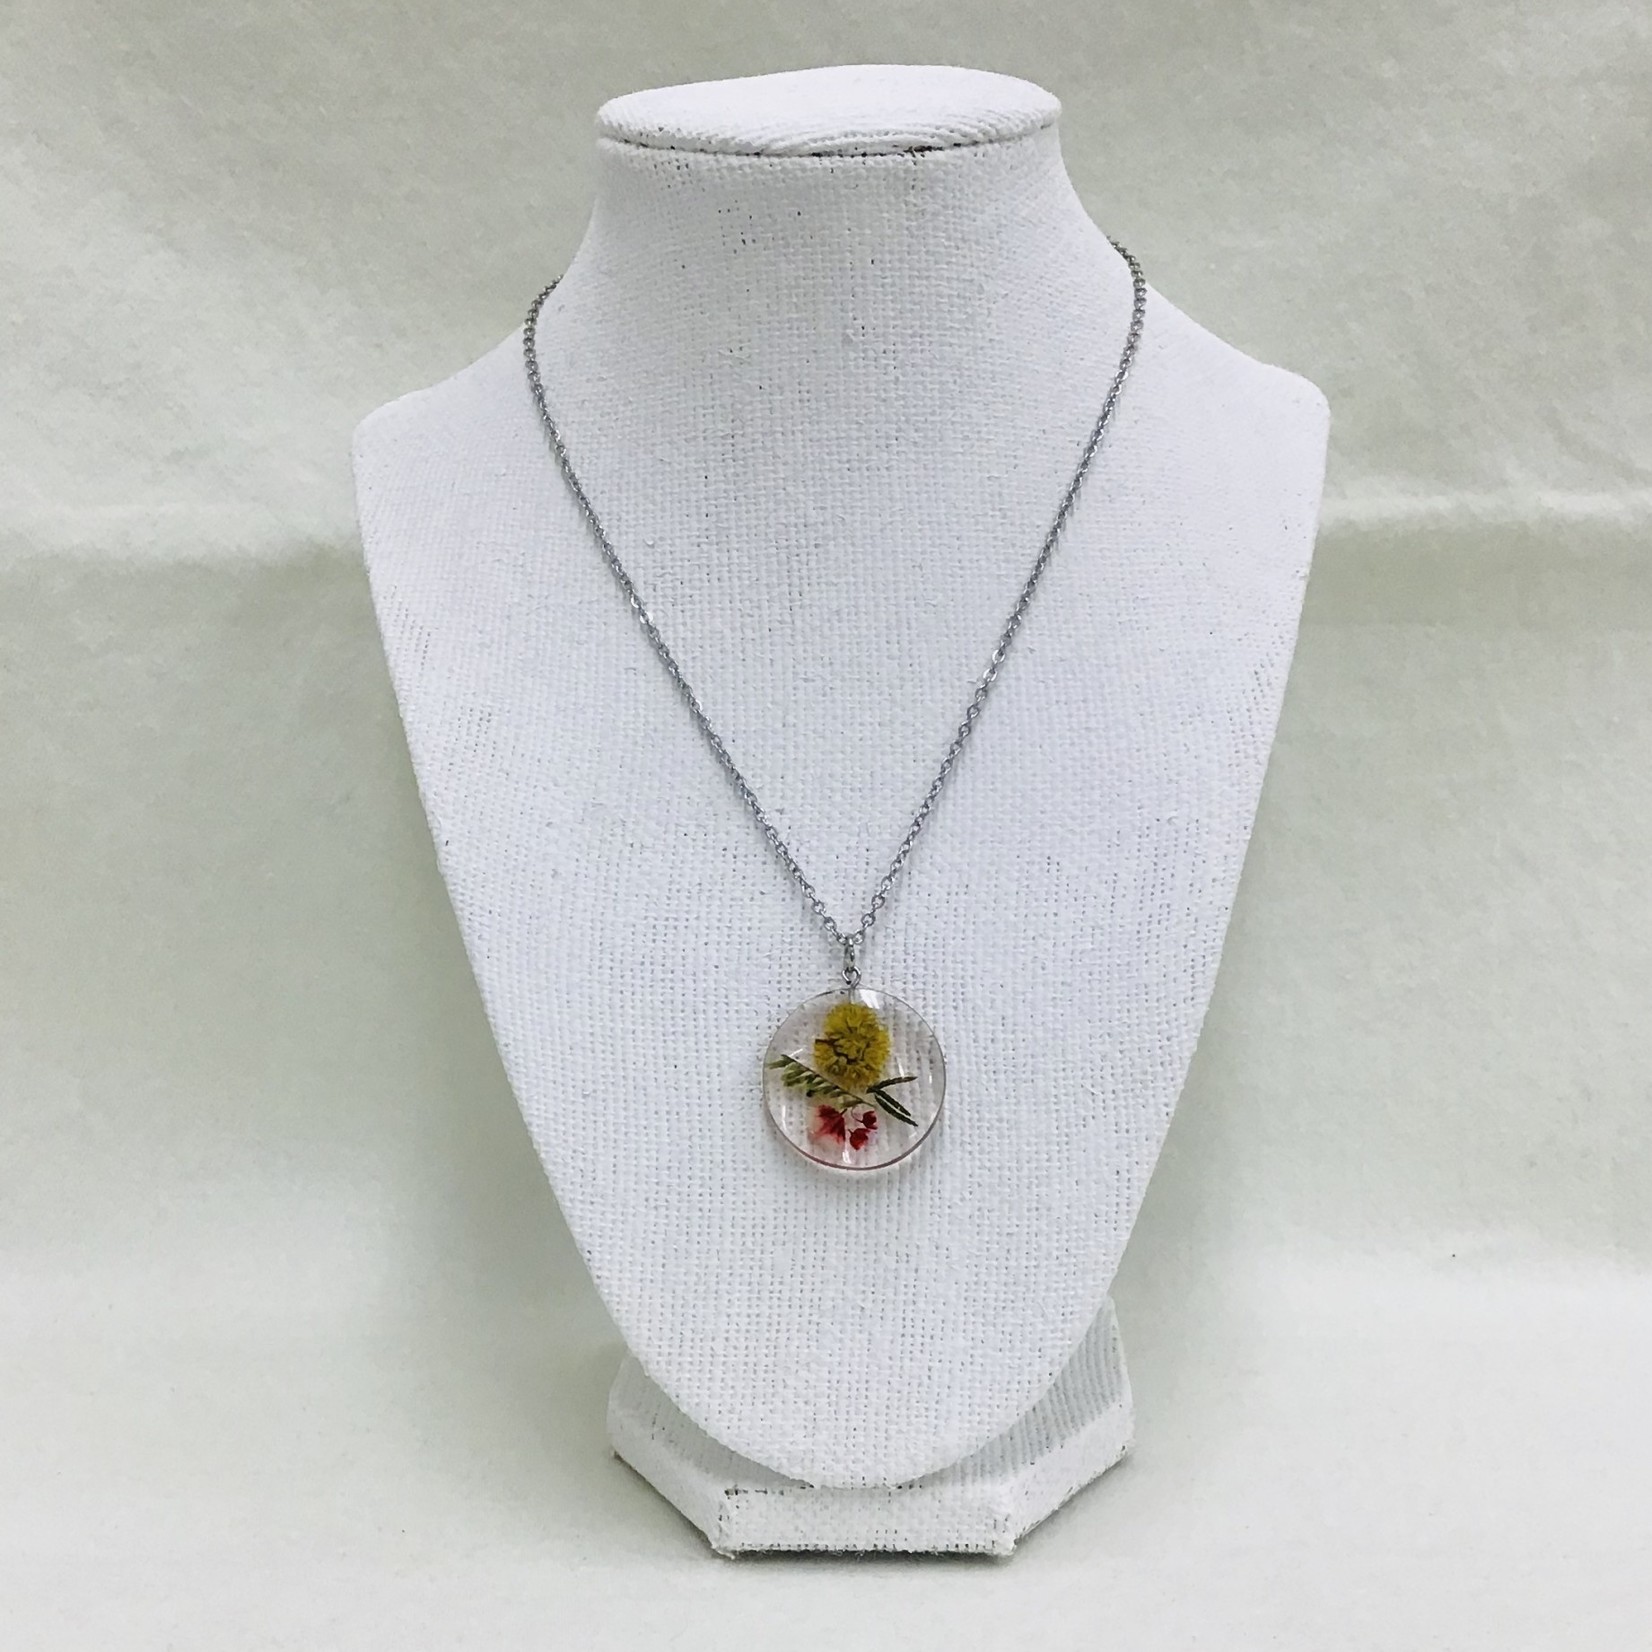 Ten Thousand Villages Round Necklace with Dried Flowers